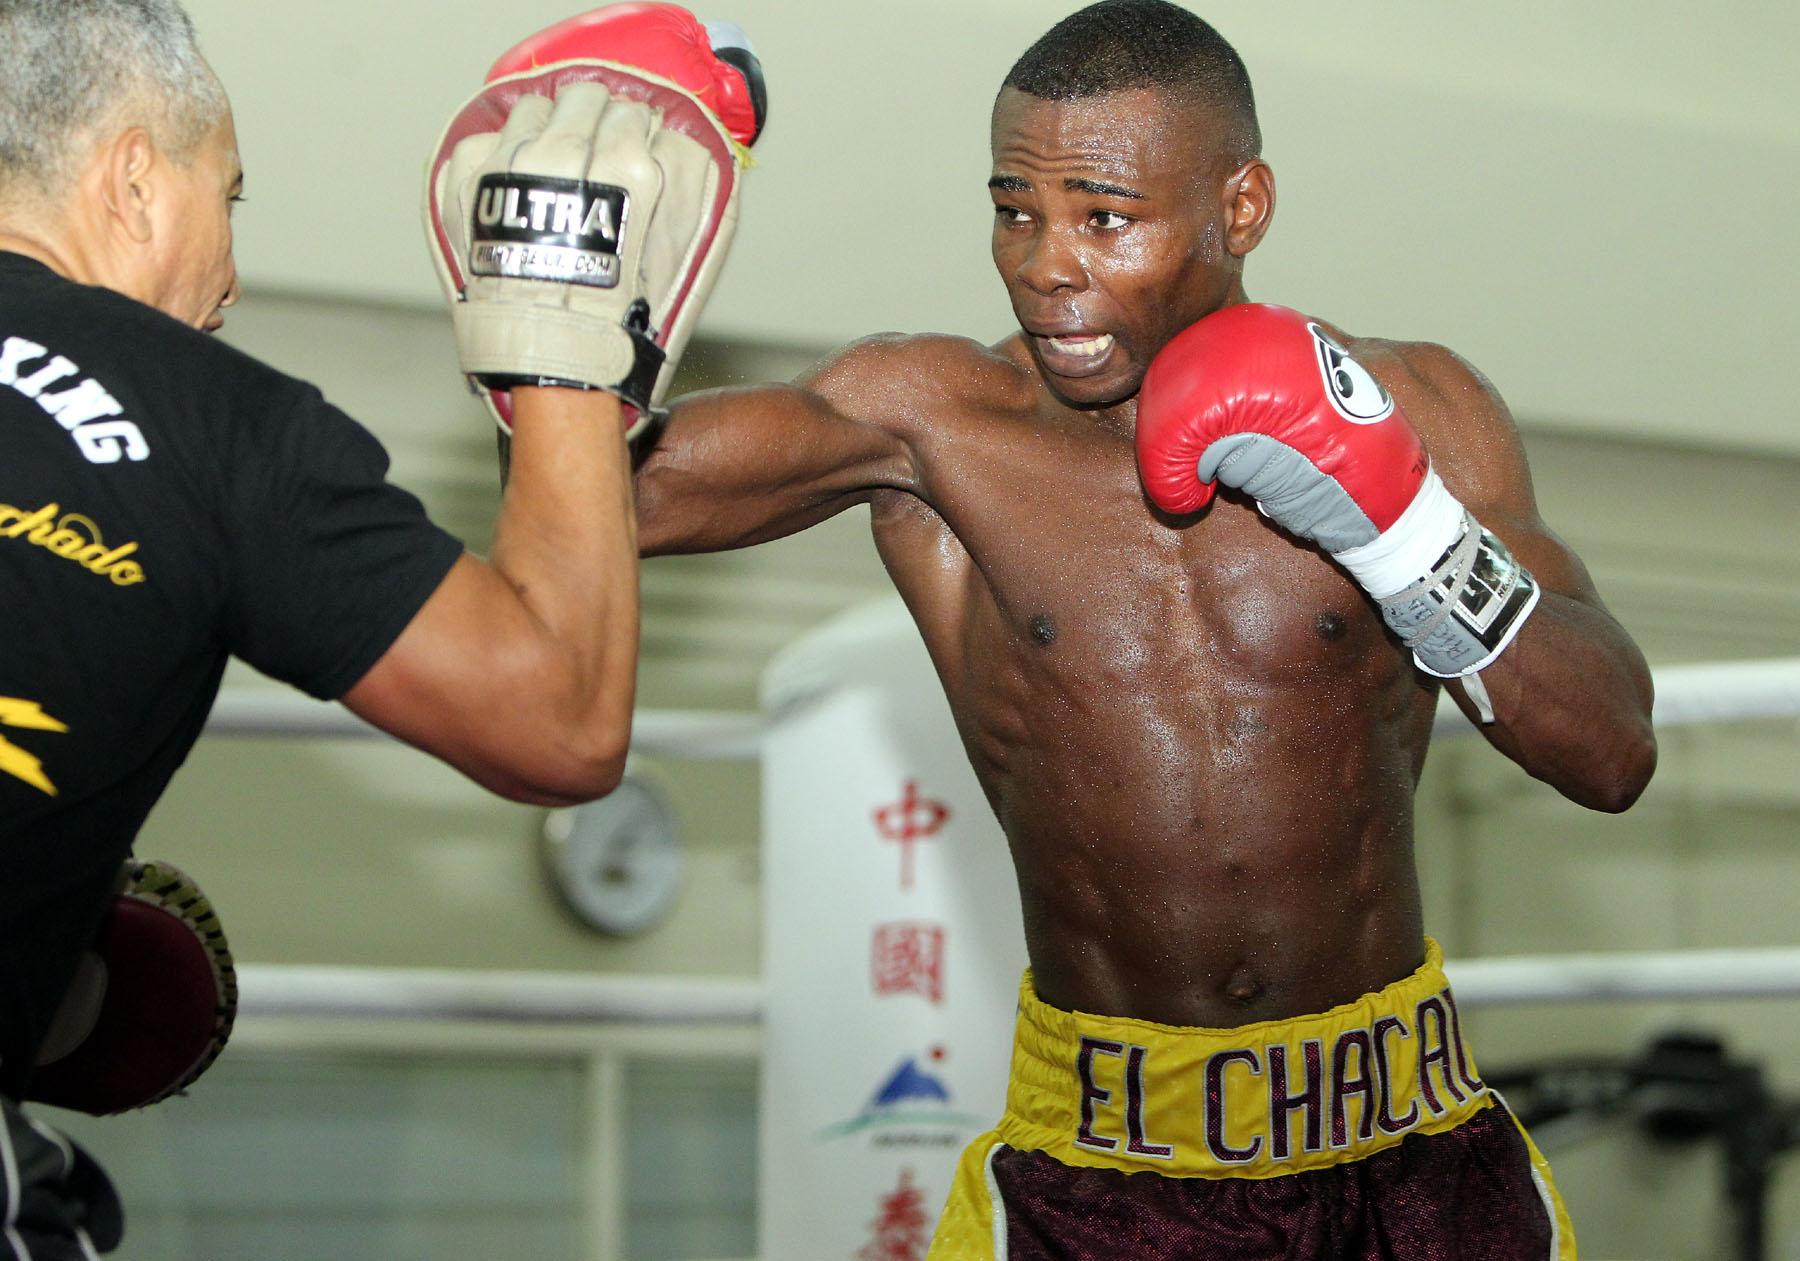 Commentary: The Legend of Guillermo Rigondeaux, myth versus reality